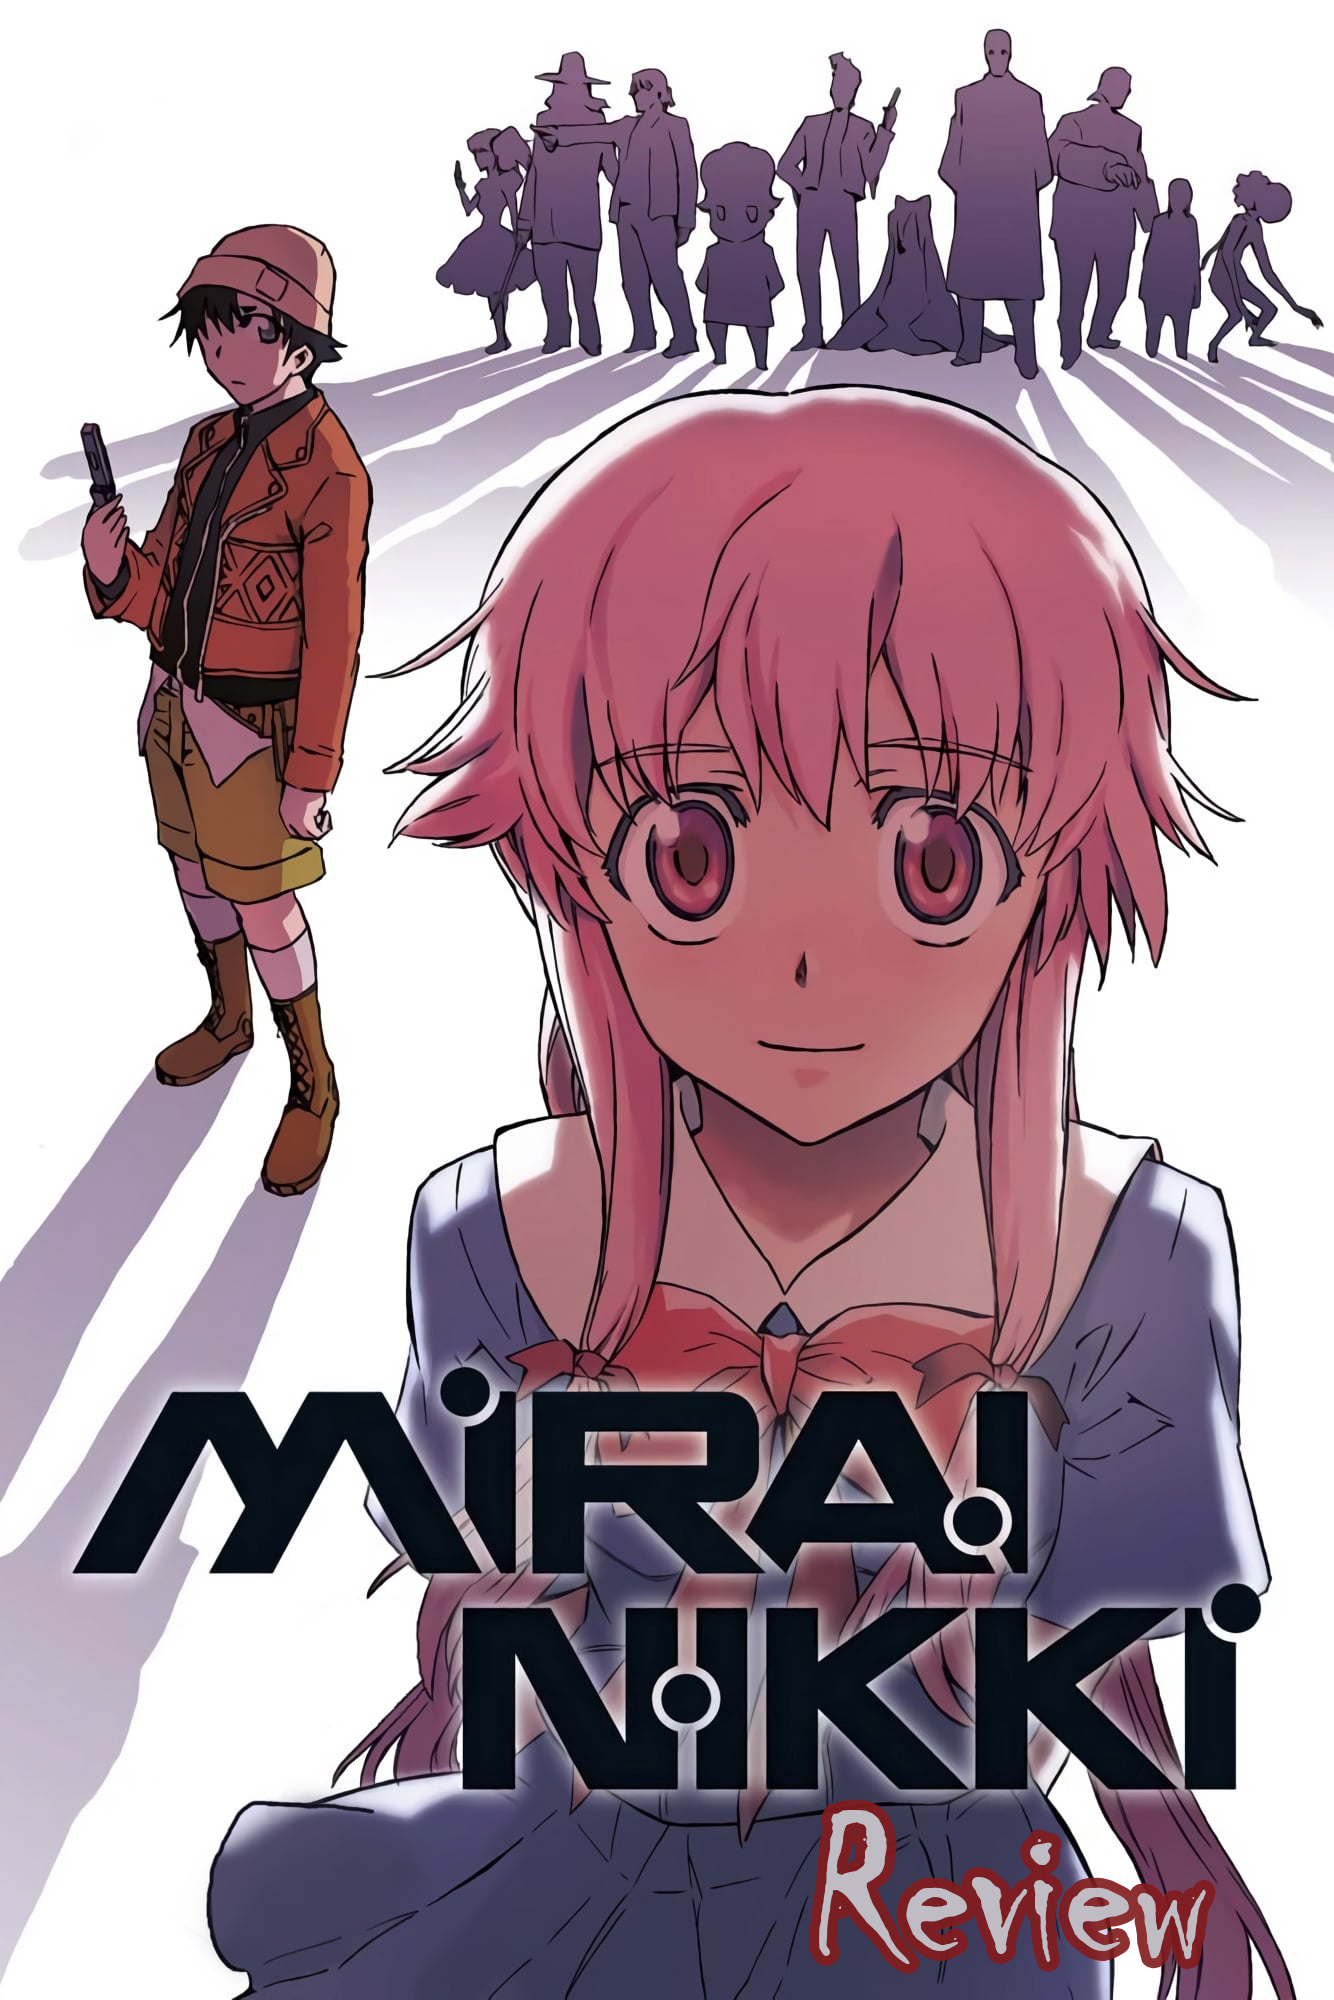 myReviewercom  Review for Mirai Nikki Future Diary  Complete Collection  2